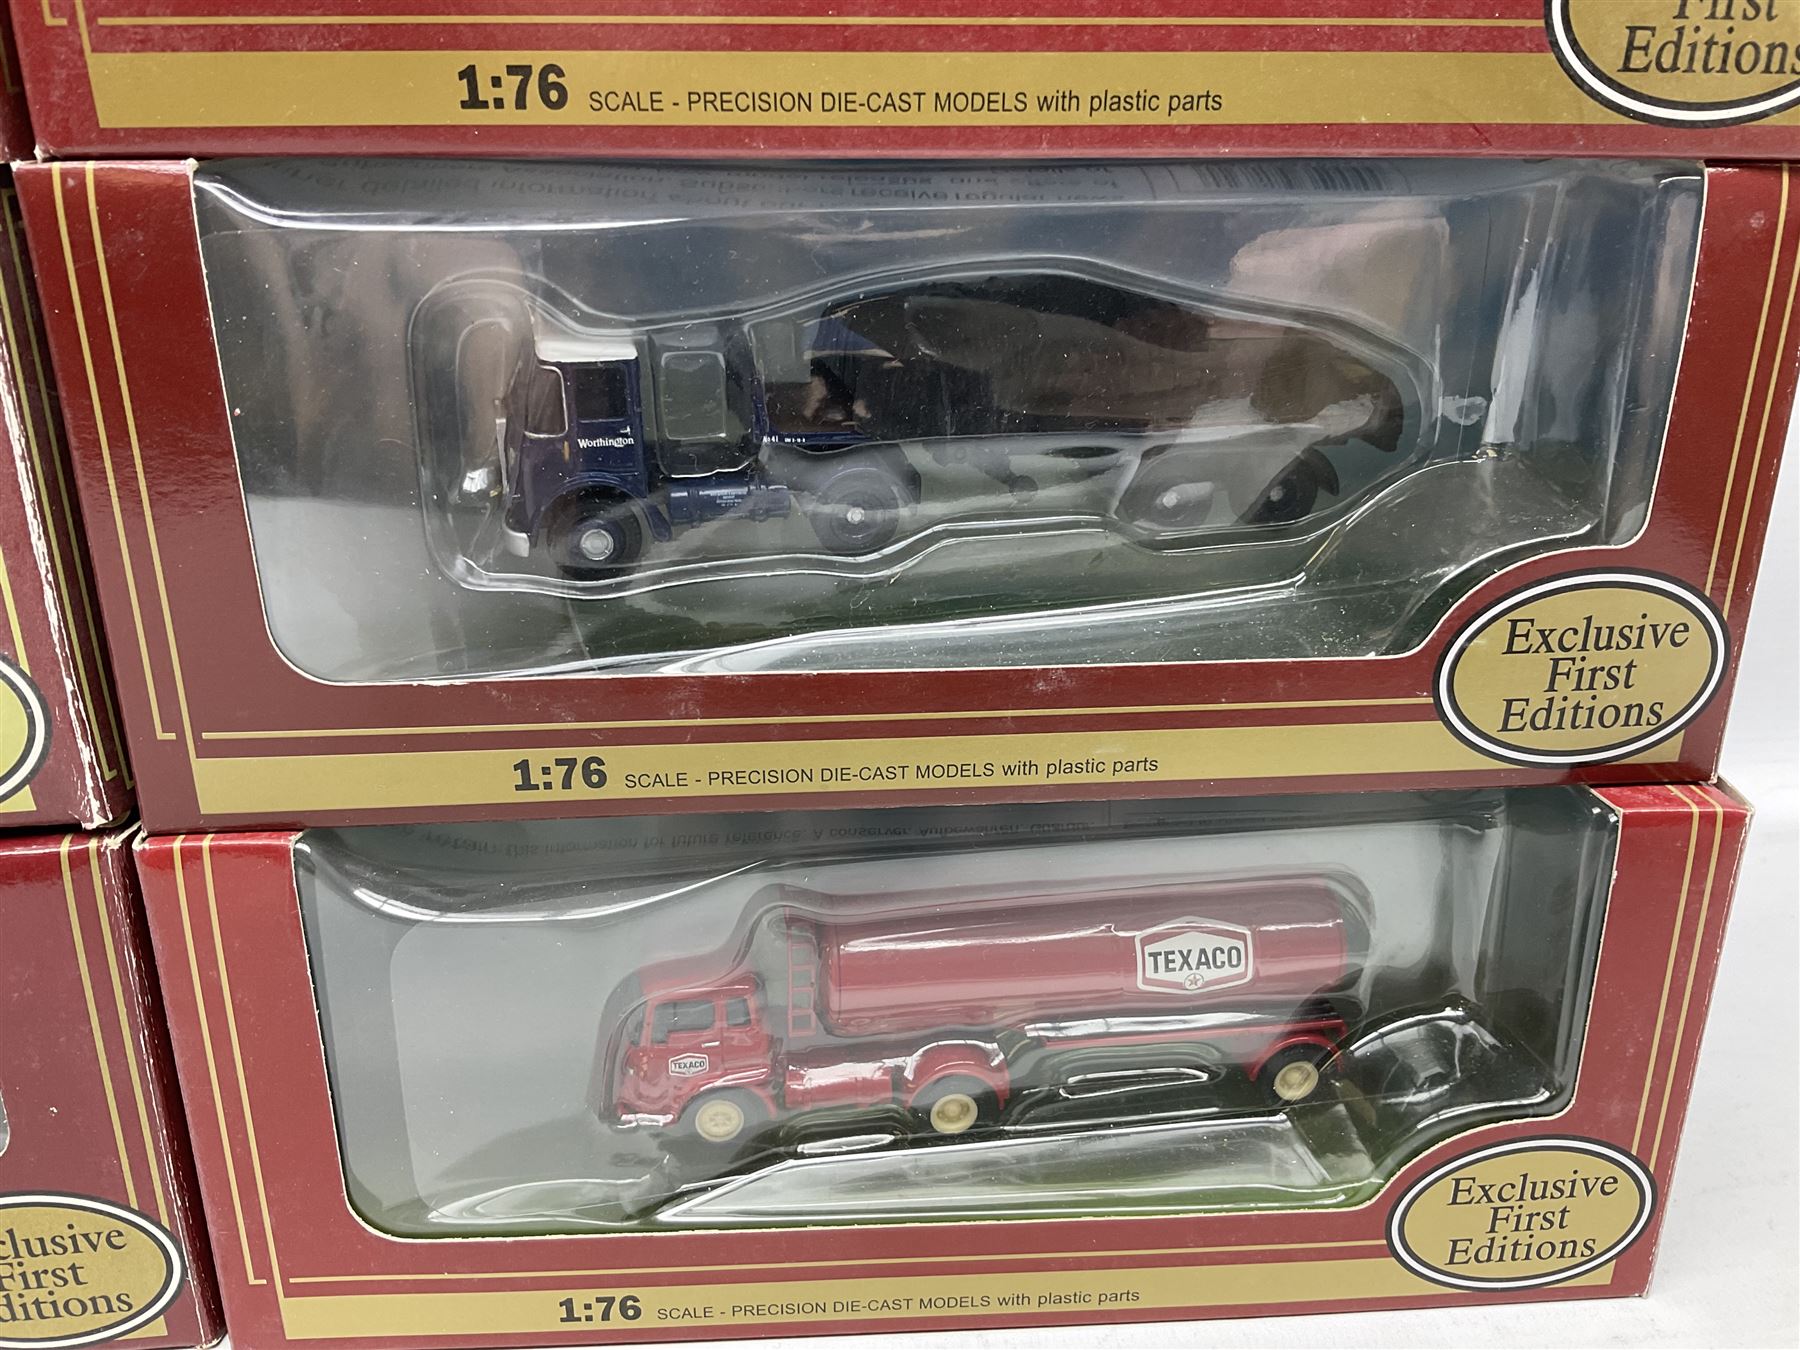 Twenty-three Exclusive First Editions Commercials 1:76 scale die-cast models - Image 9 of 10